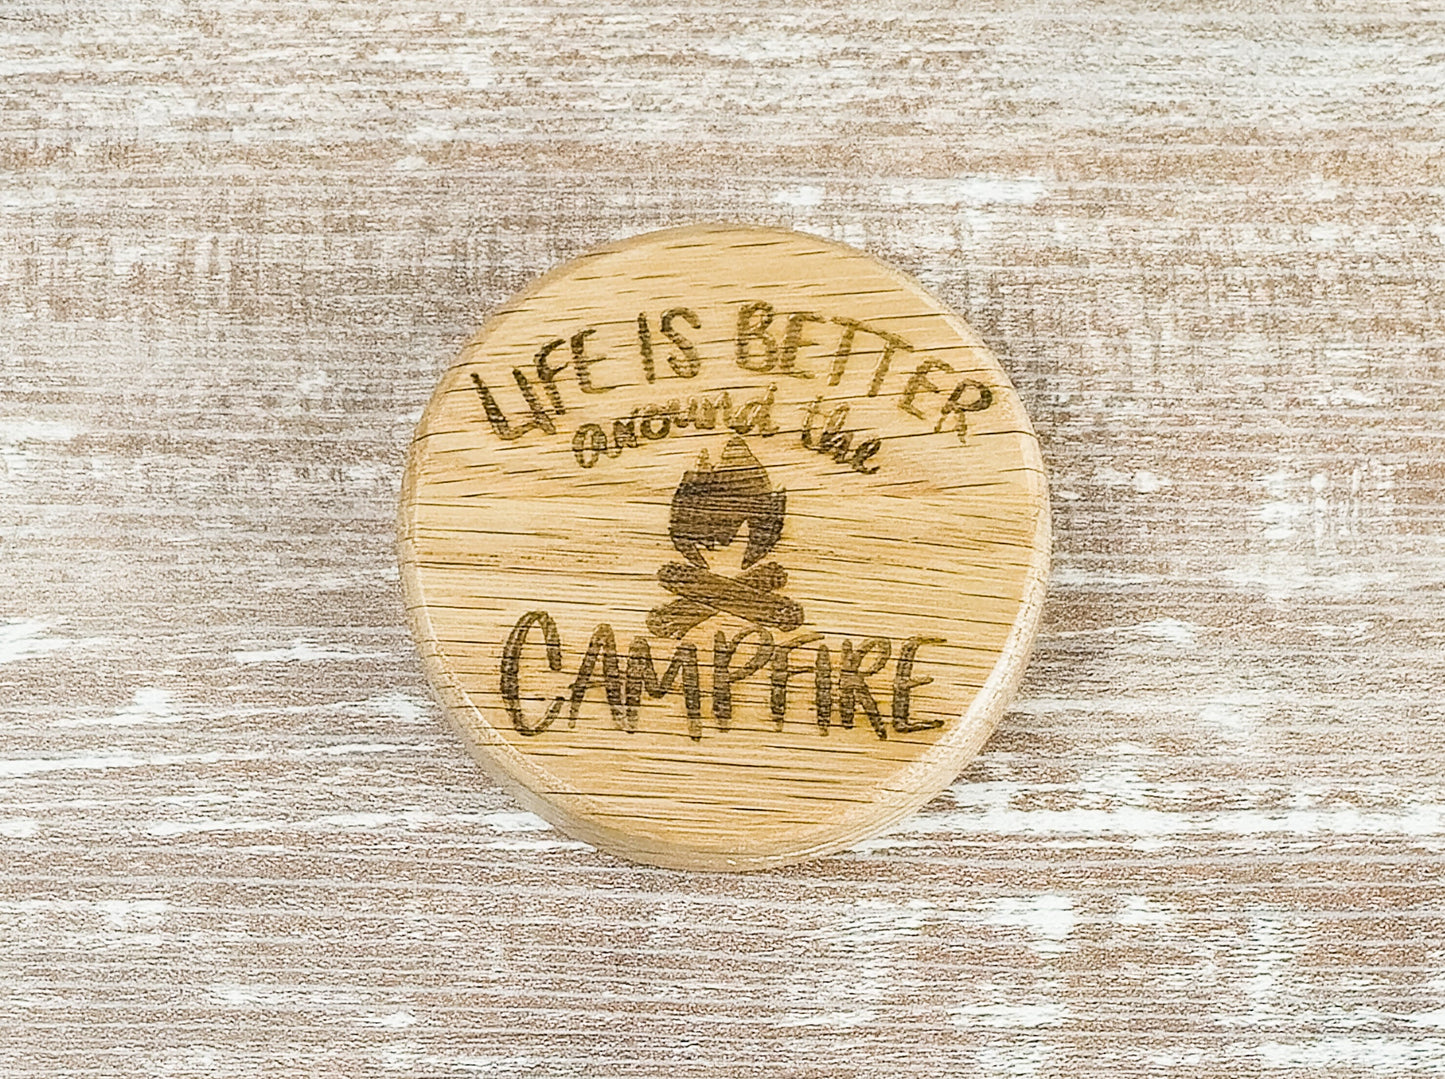 Wood Bottle Opener with Camping Engraving